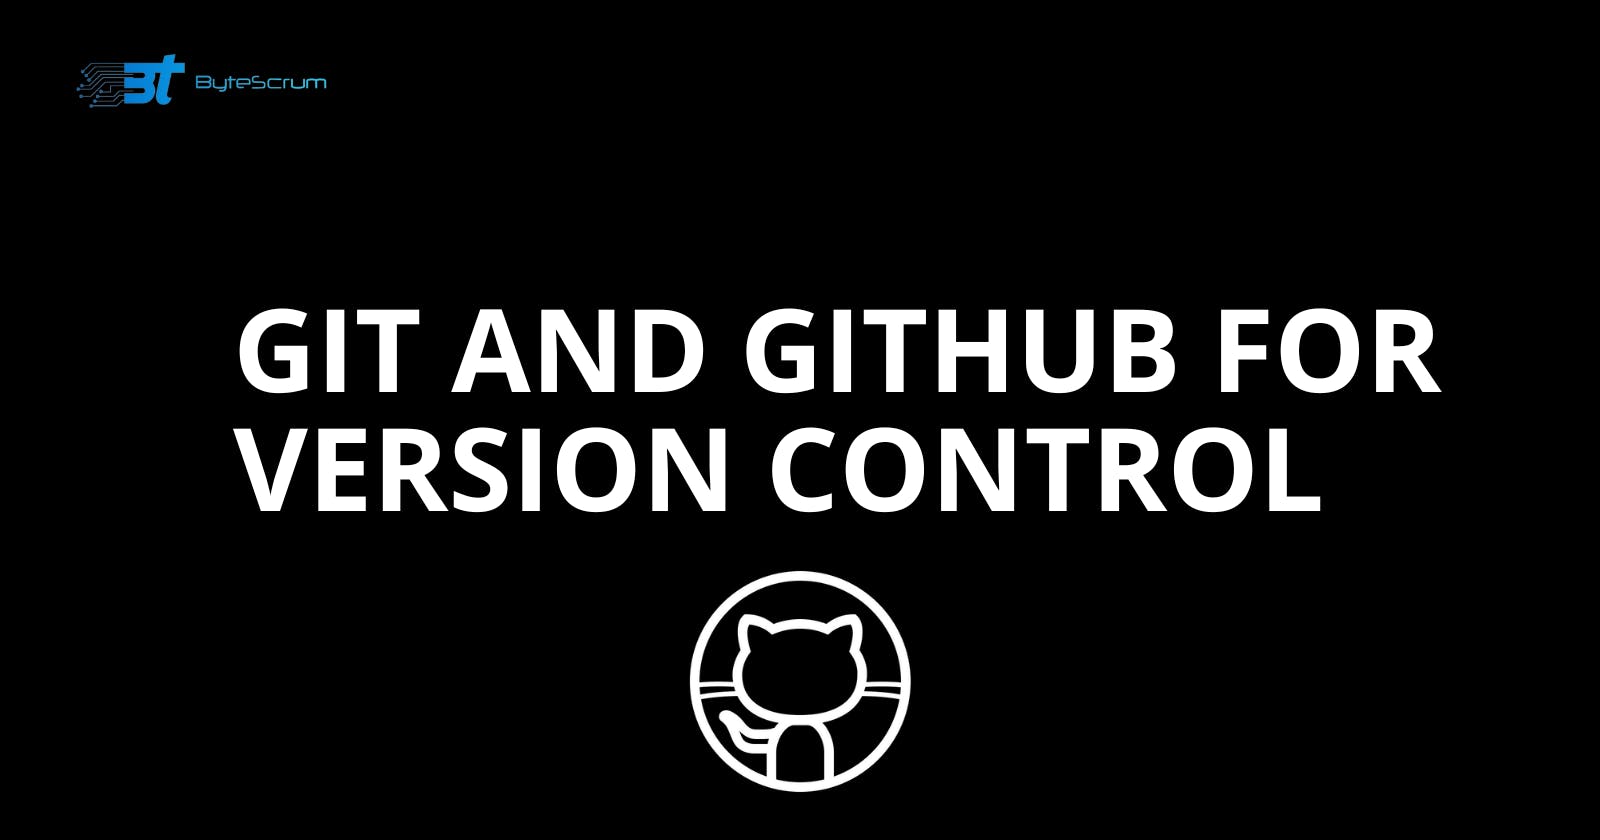 How to Use Git and GitHub for Version Control